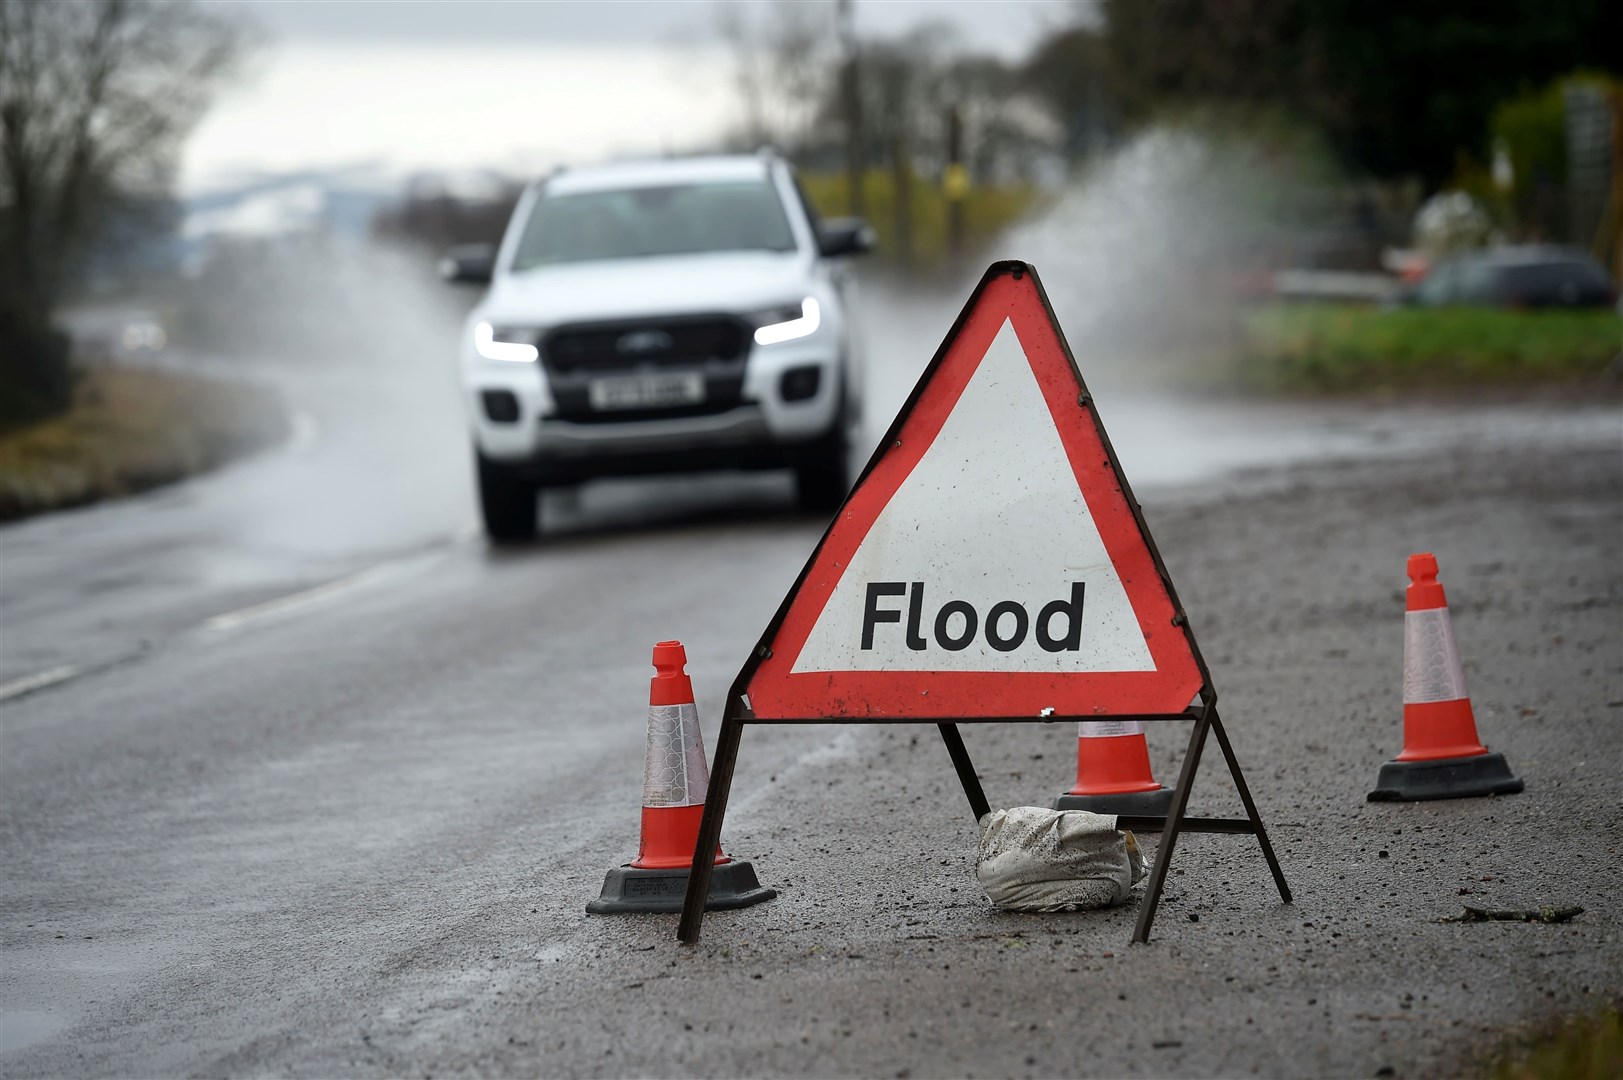 Flooding on A832 Tore to Muir of Ord road yesterday. Many roads in Ross-shire are affected by standing water today.